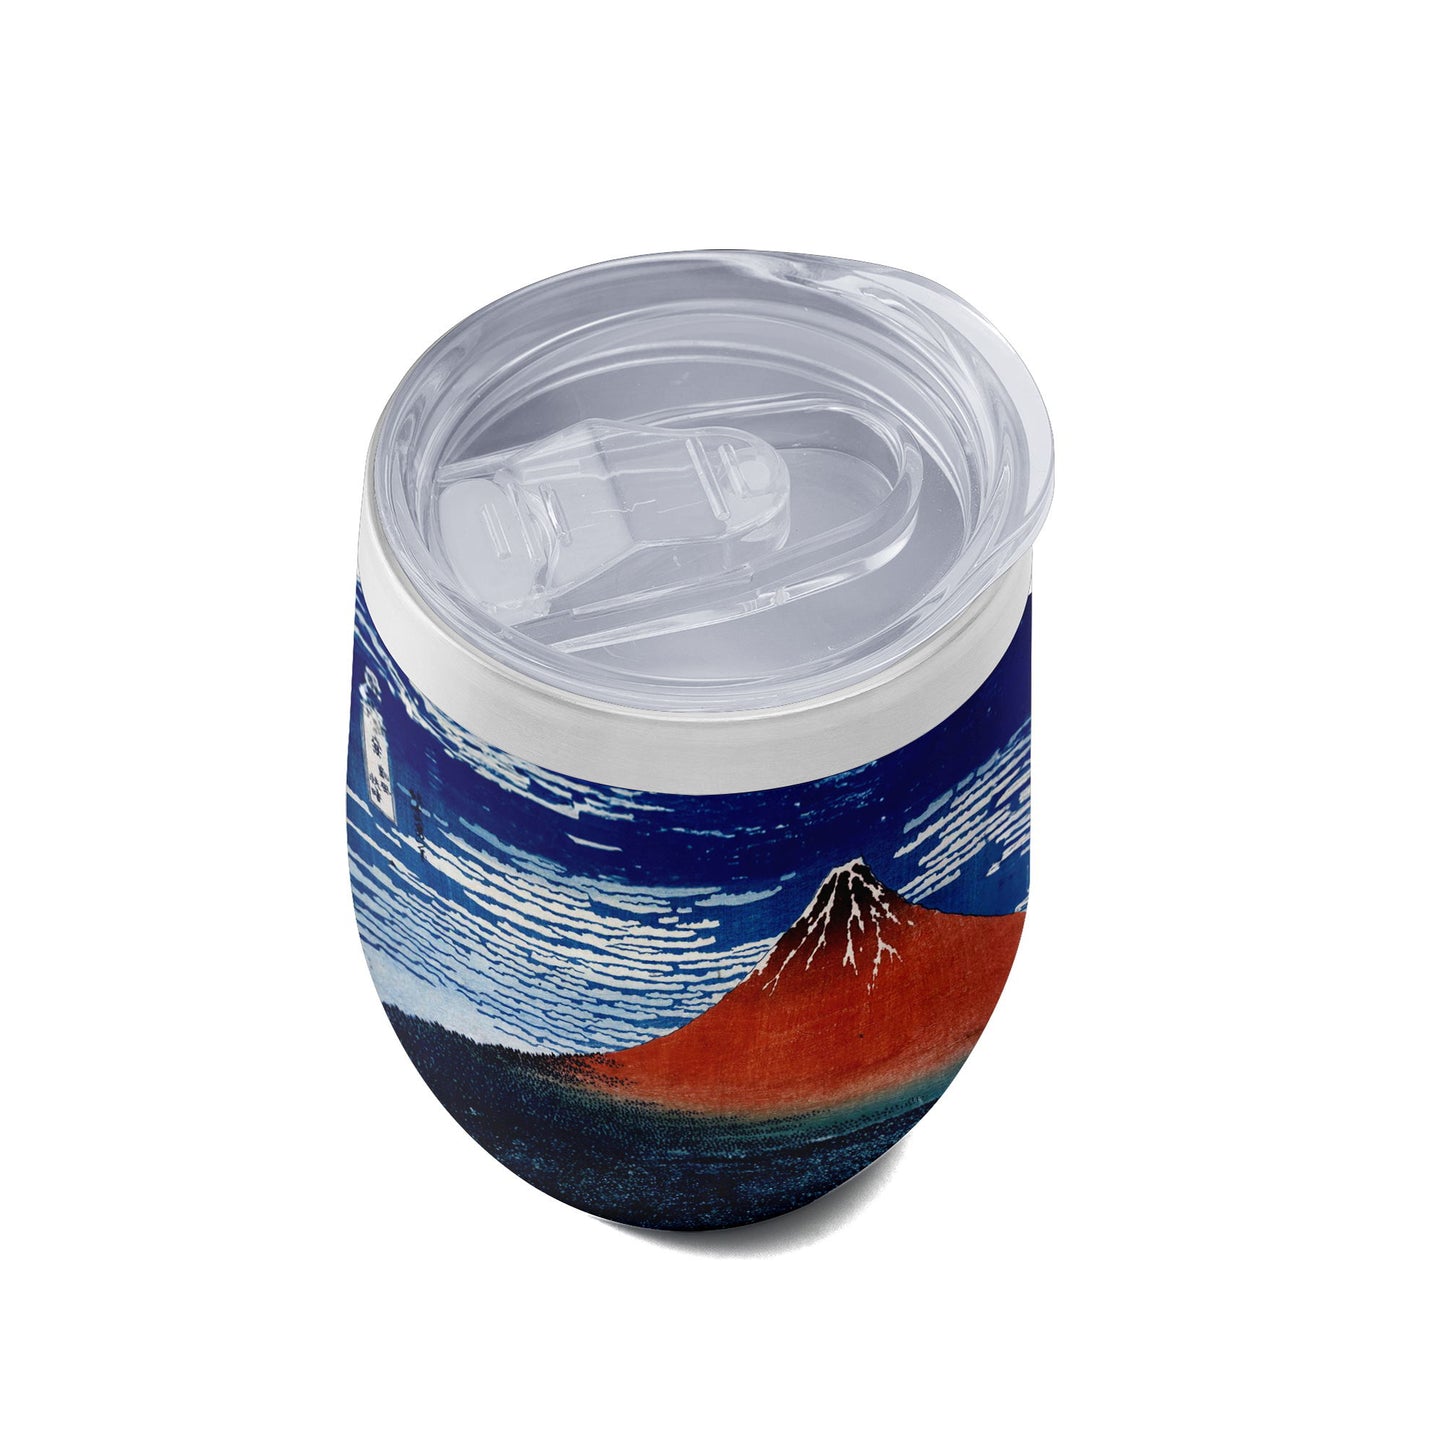 Custom Printed 12oz Stainless Steel Wine Tumbler Pr260: Ukiyo-e Hokusai's Thirty Six Views of Mount Red Fuji Insulated Eggshell Cup with Lid 3